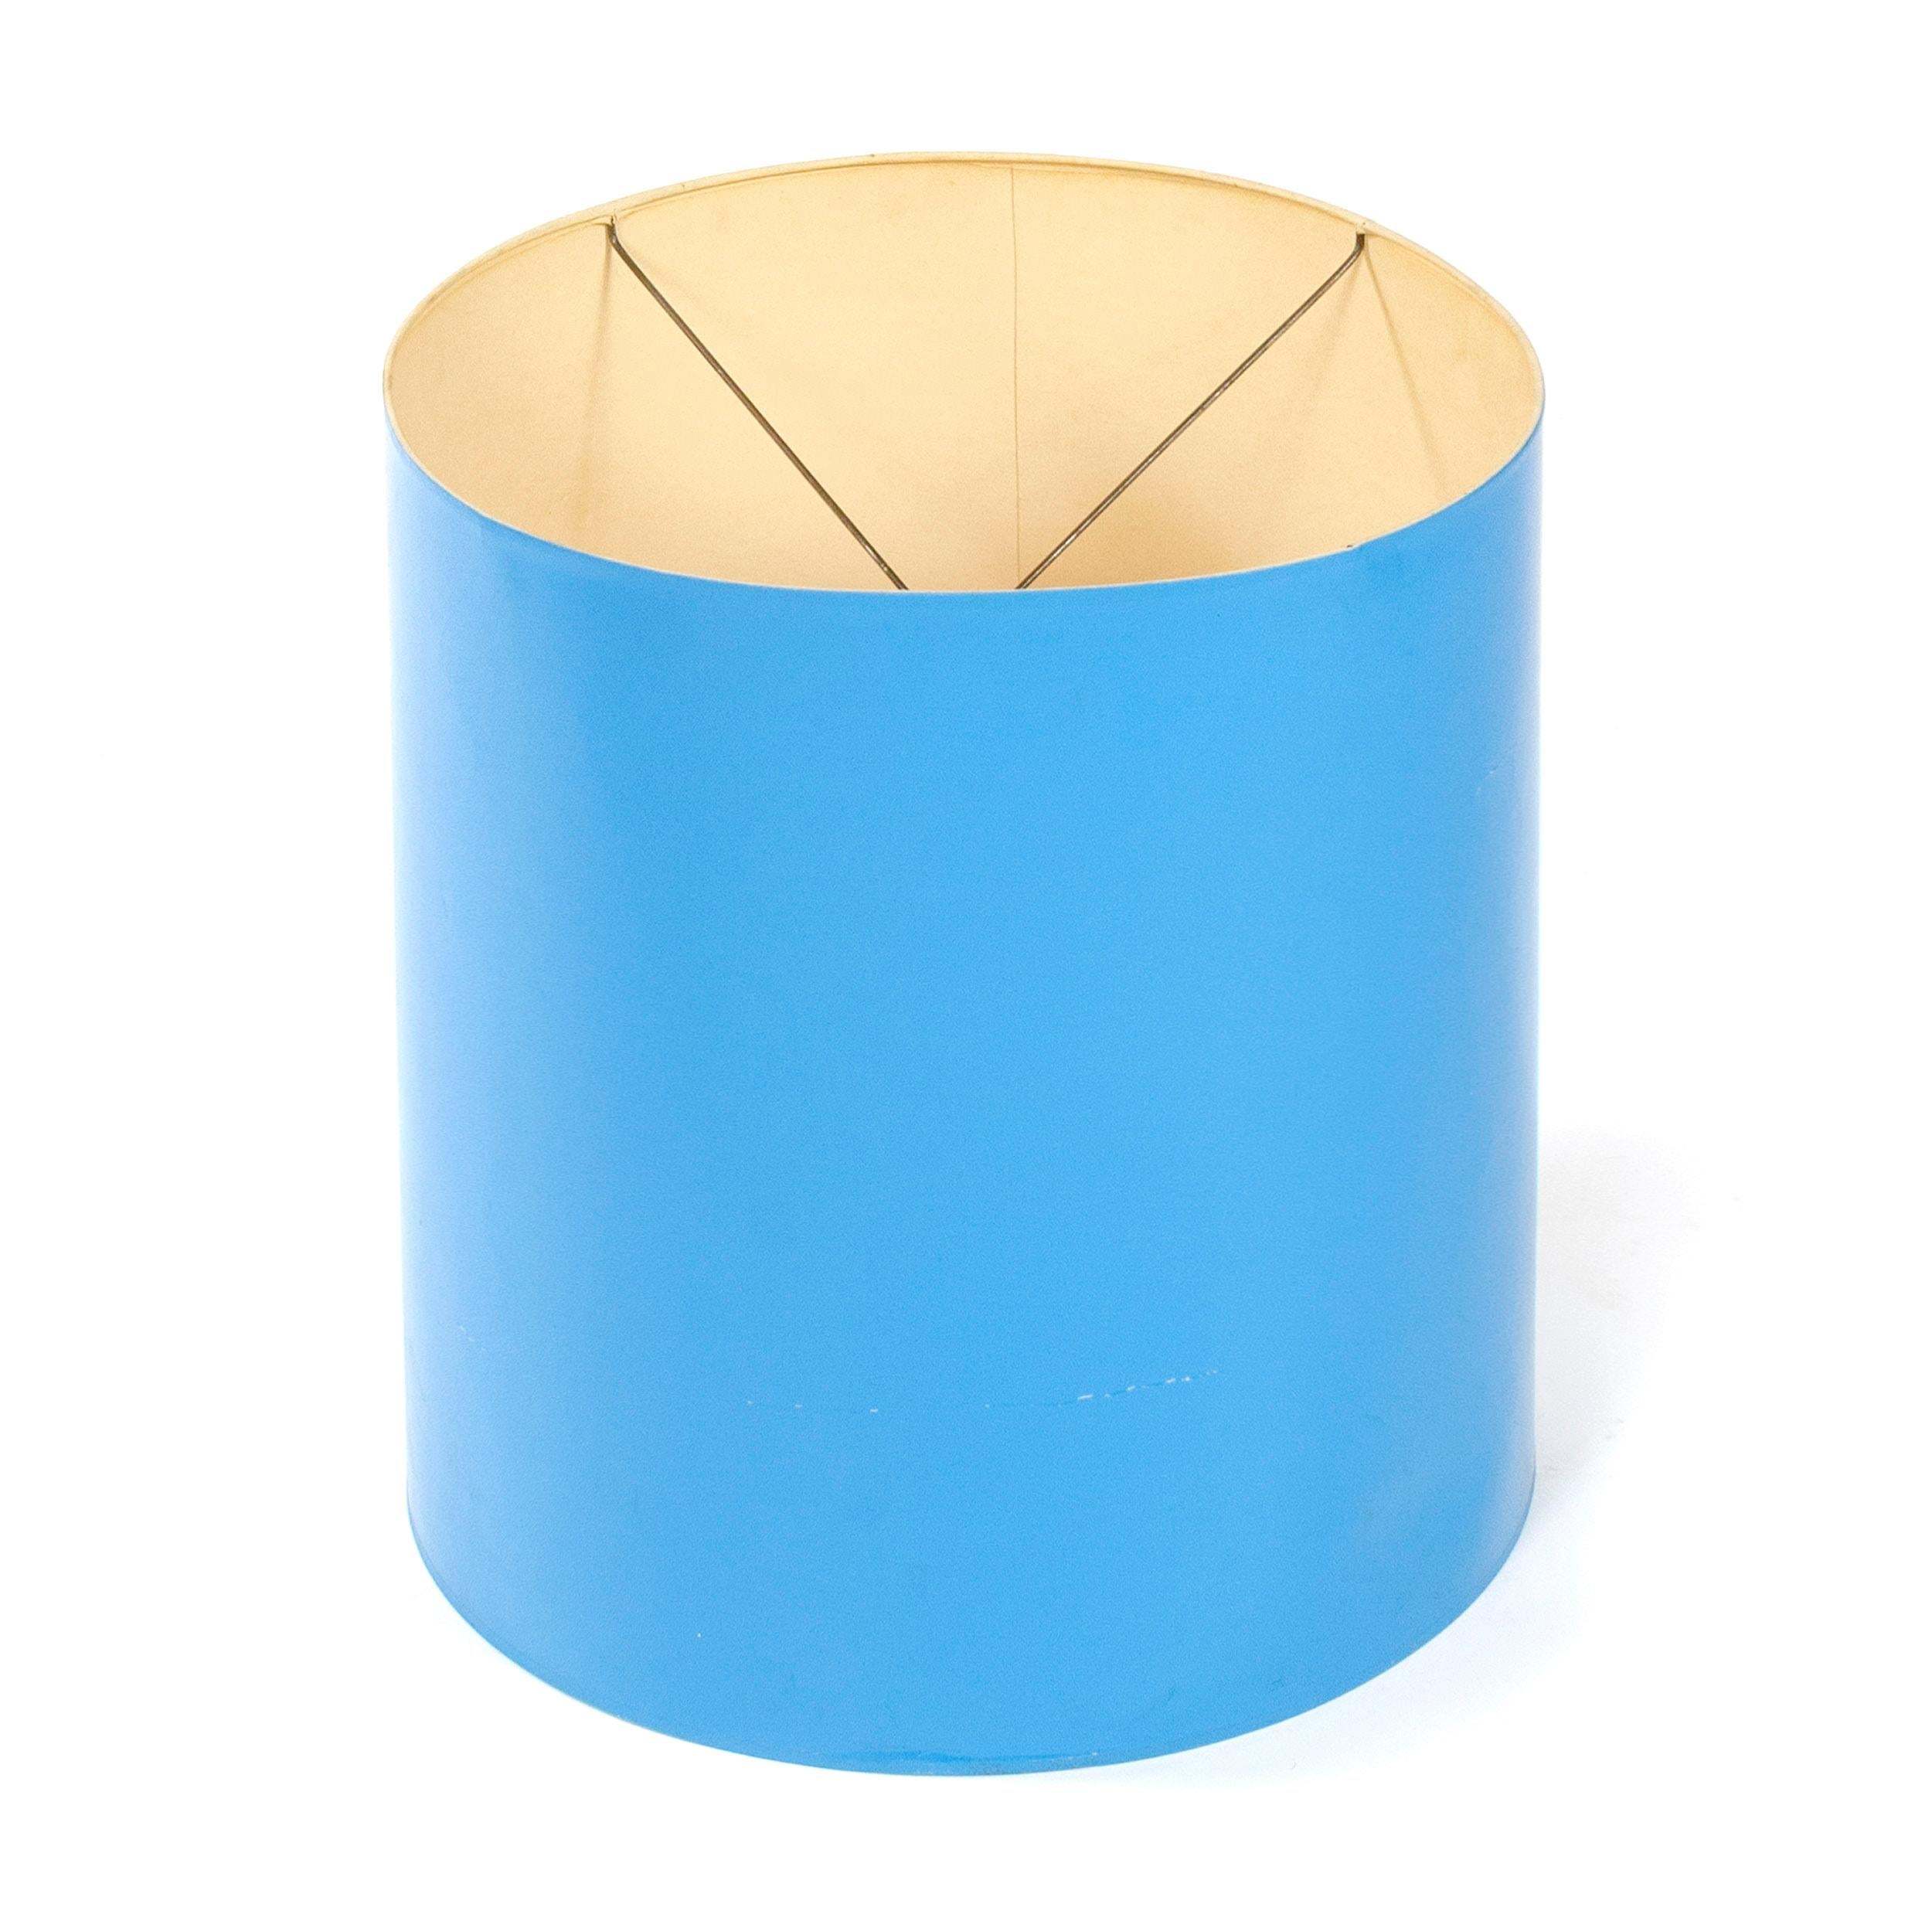 A vibrant, blue lacquered drum shade.